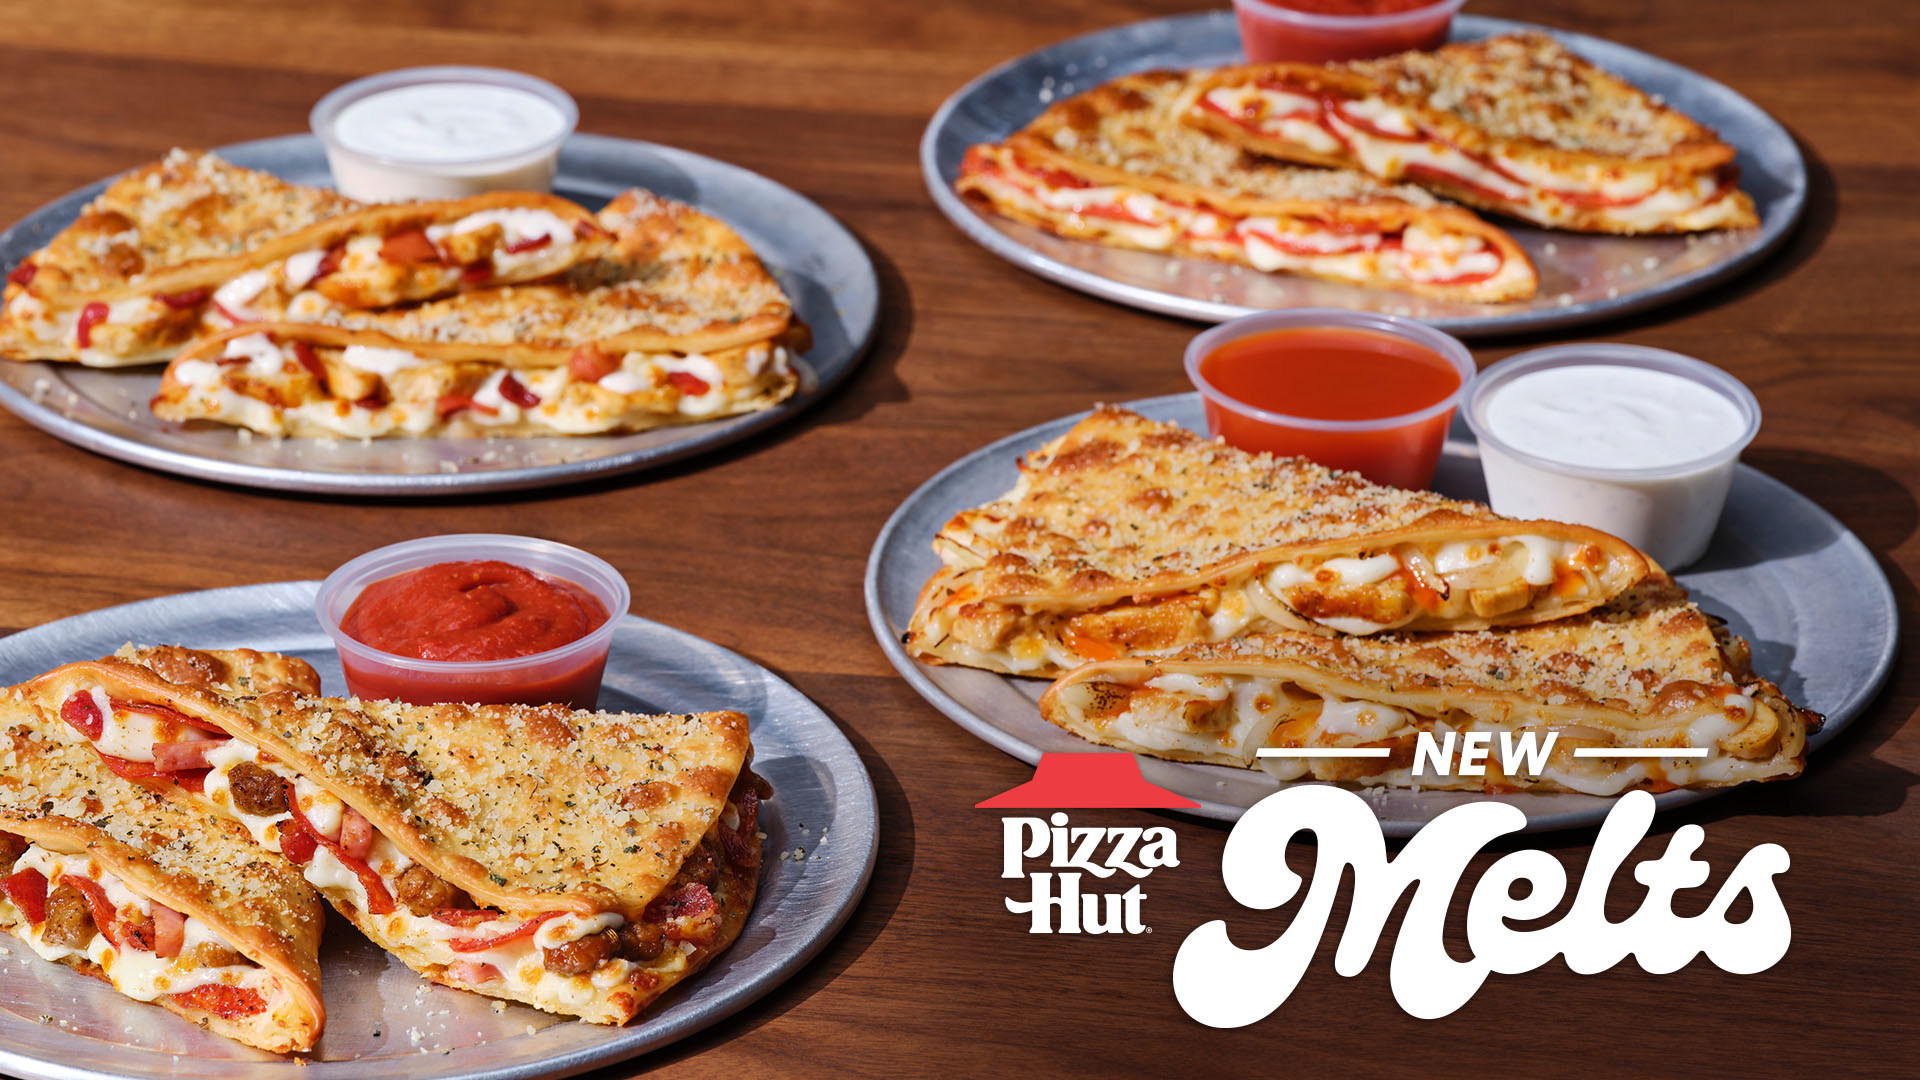 Pizza Hut Launches New Category and Product, MELTS, and They're Not for